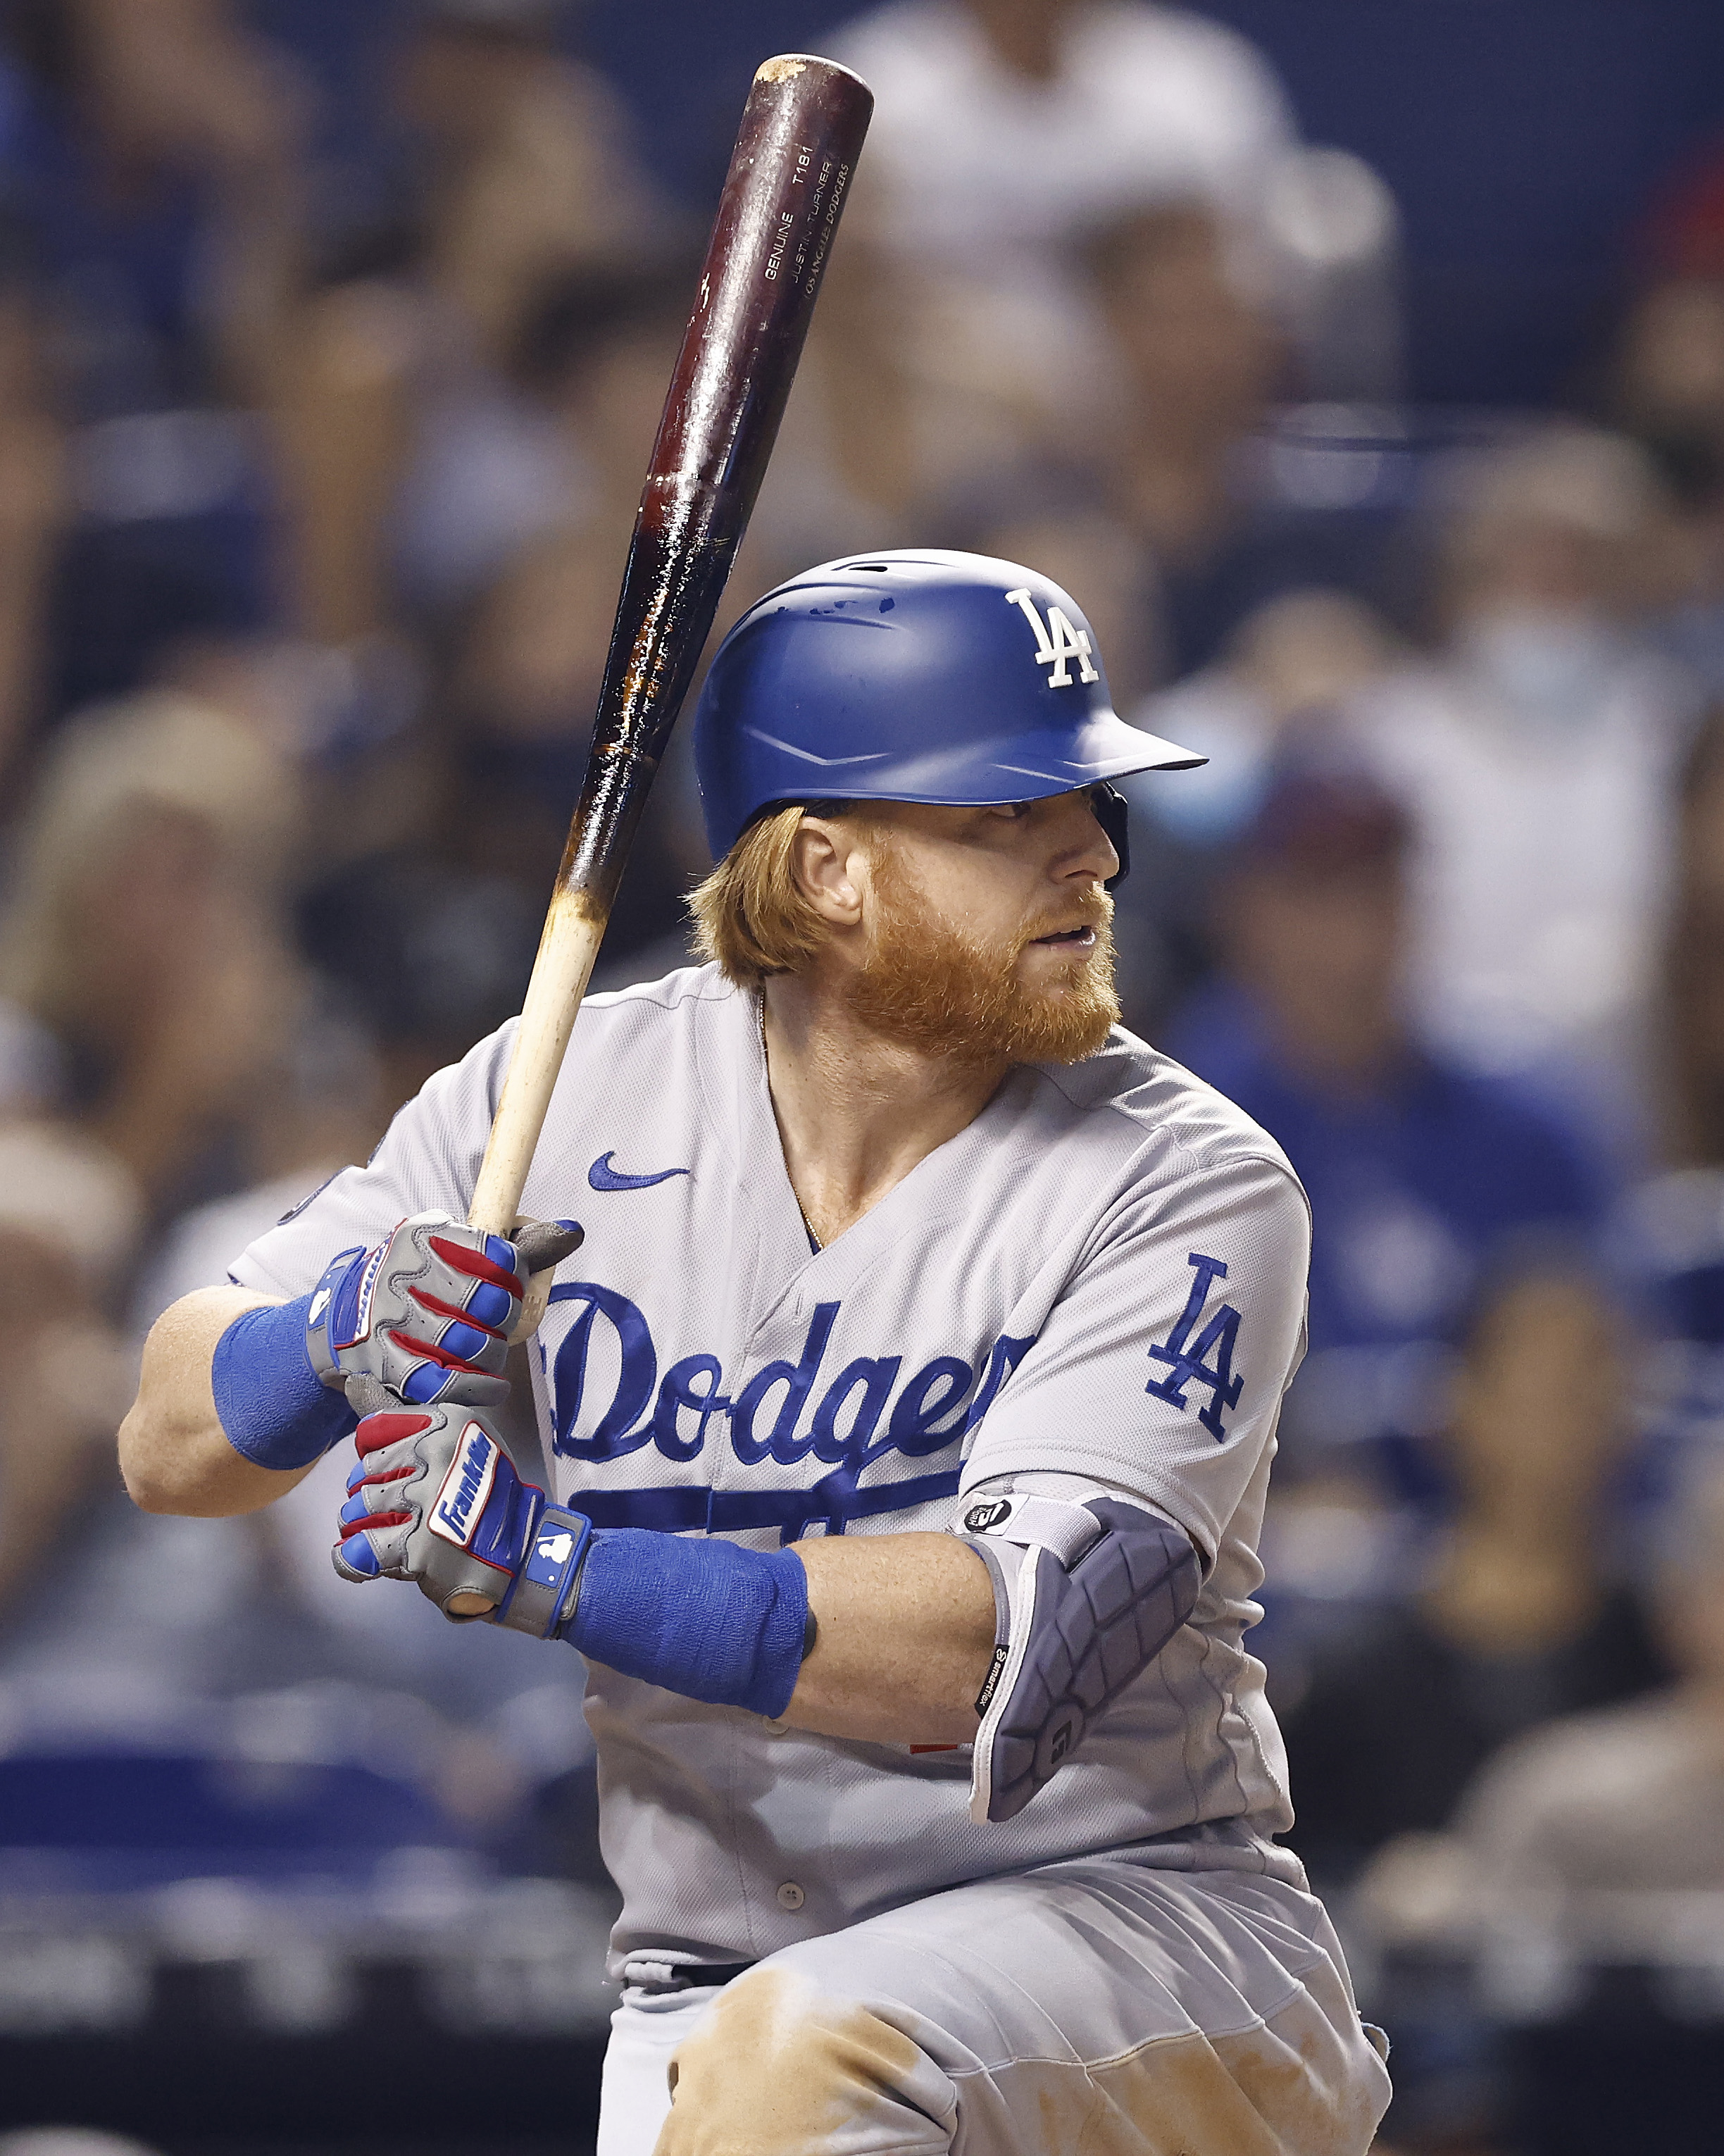 Justin Turner #10 of the Los Angeles Dodgers at bat against the Miami Marlins at loanDepot park on July 05, 2021 in Miami, Florida.